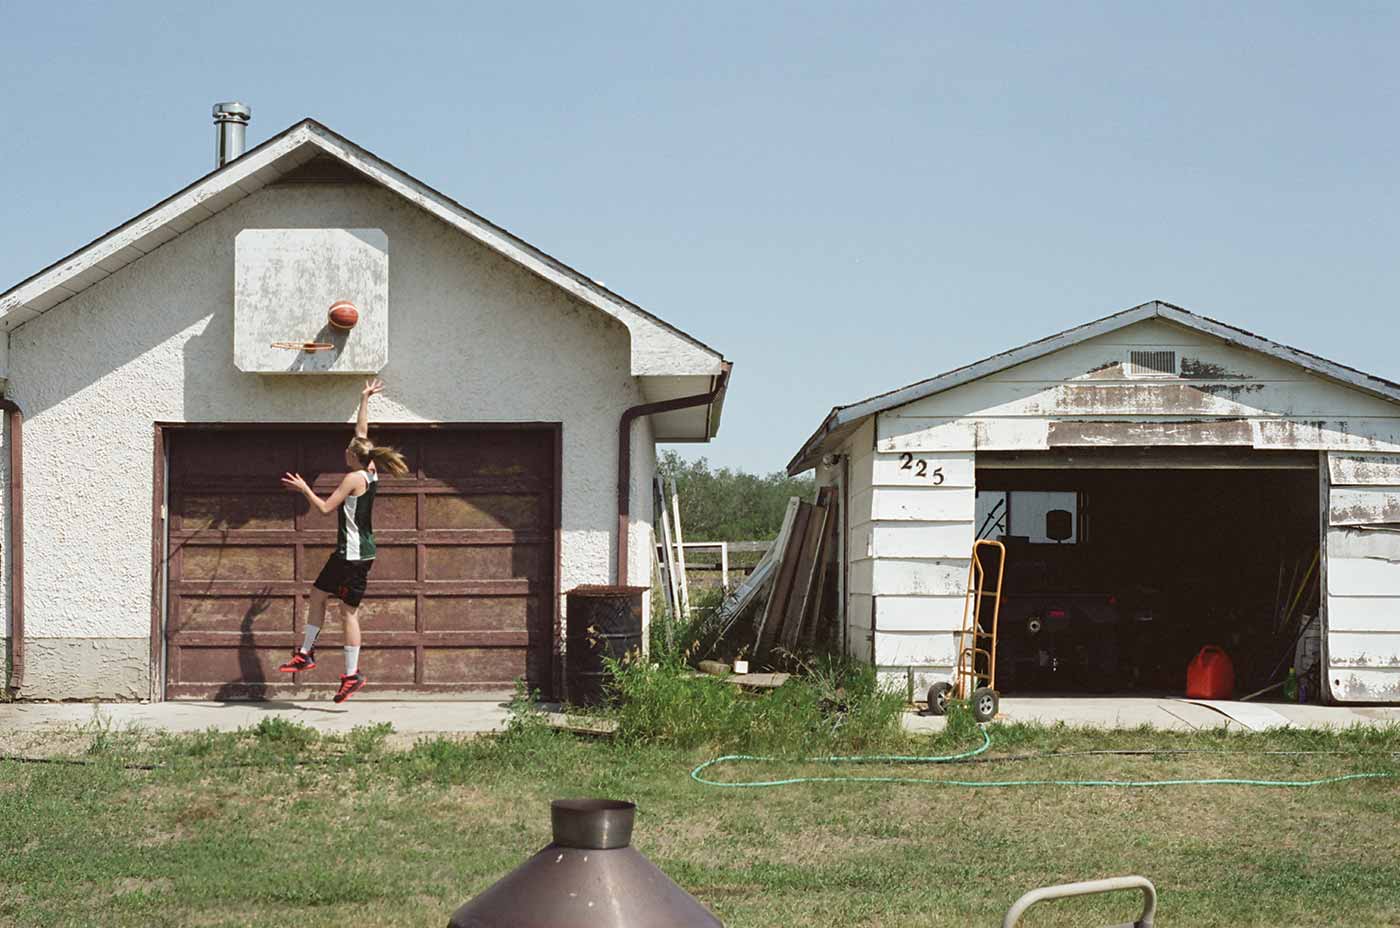 Sydney Tabin shoots a basketball into a net hung above a garage door. The garage and nearby buildings are well weathered and in a rural location.